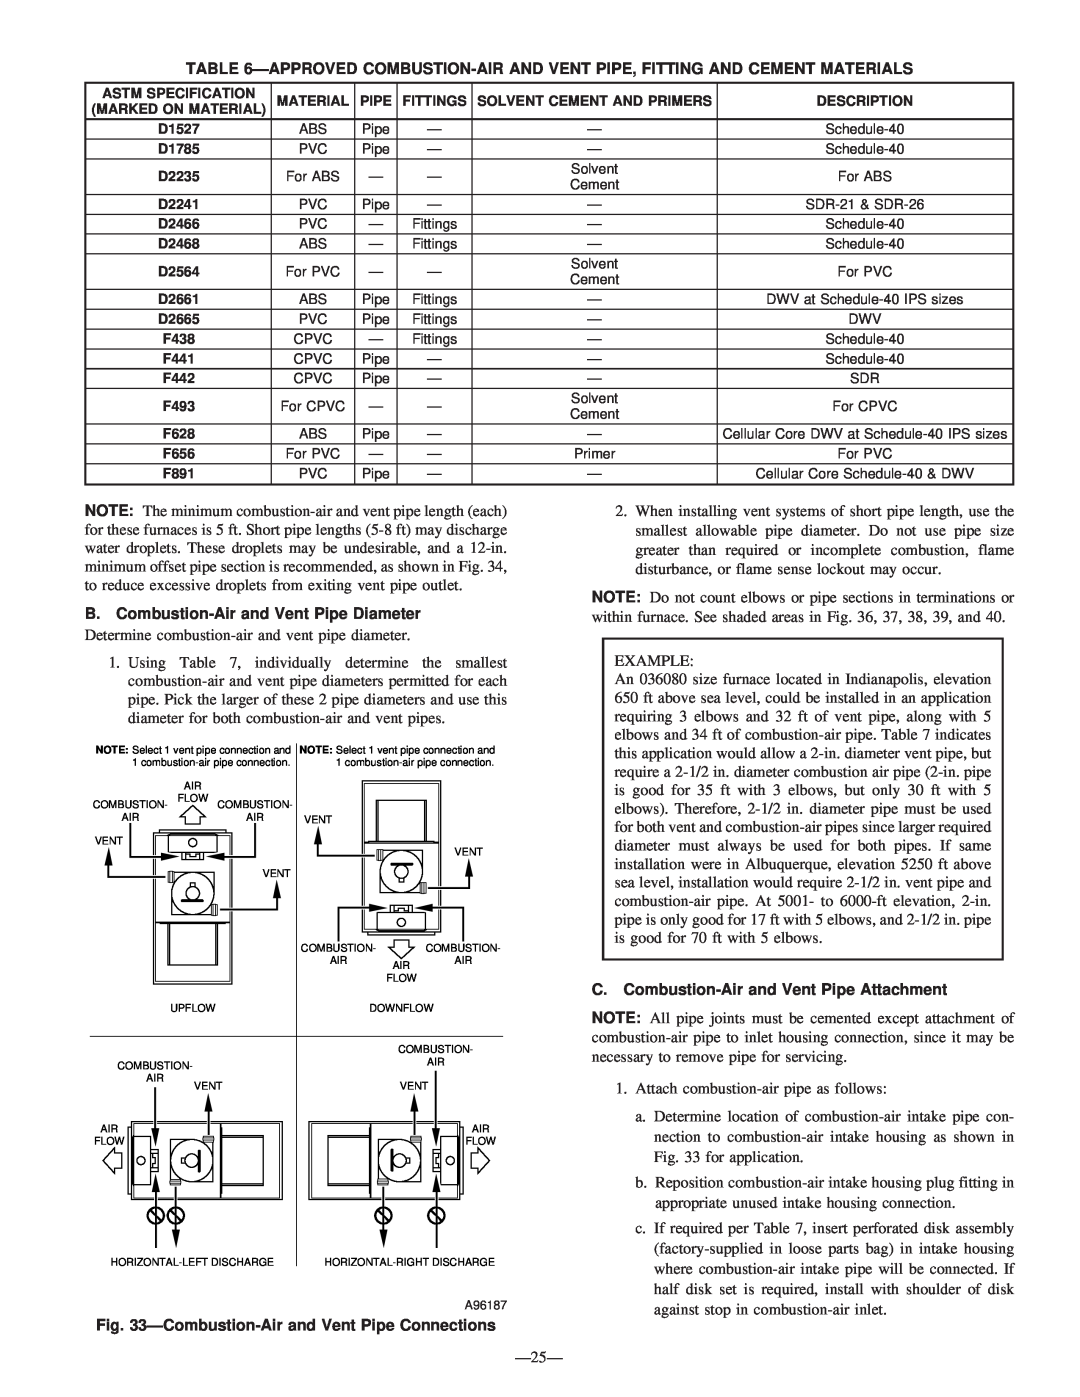 Bryant 340MAV instruction manual B.Combustion-Airand Vent Pipe Diameter, Combustion-Airand Vent Pipe Connections 